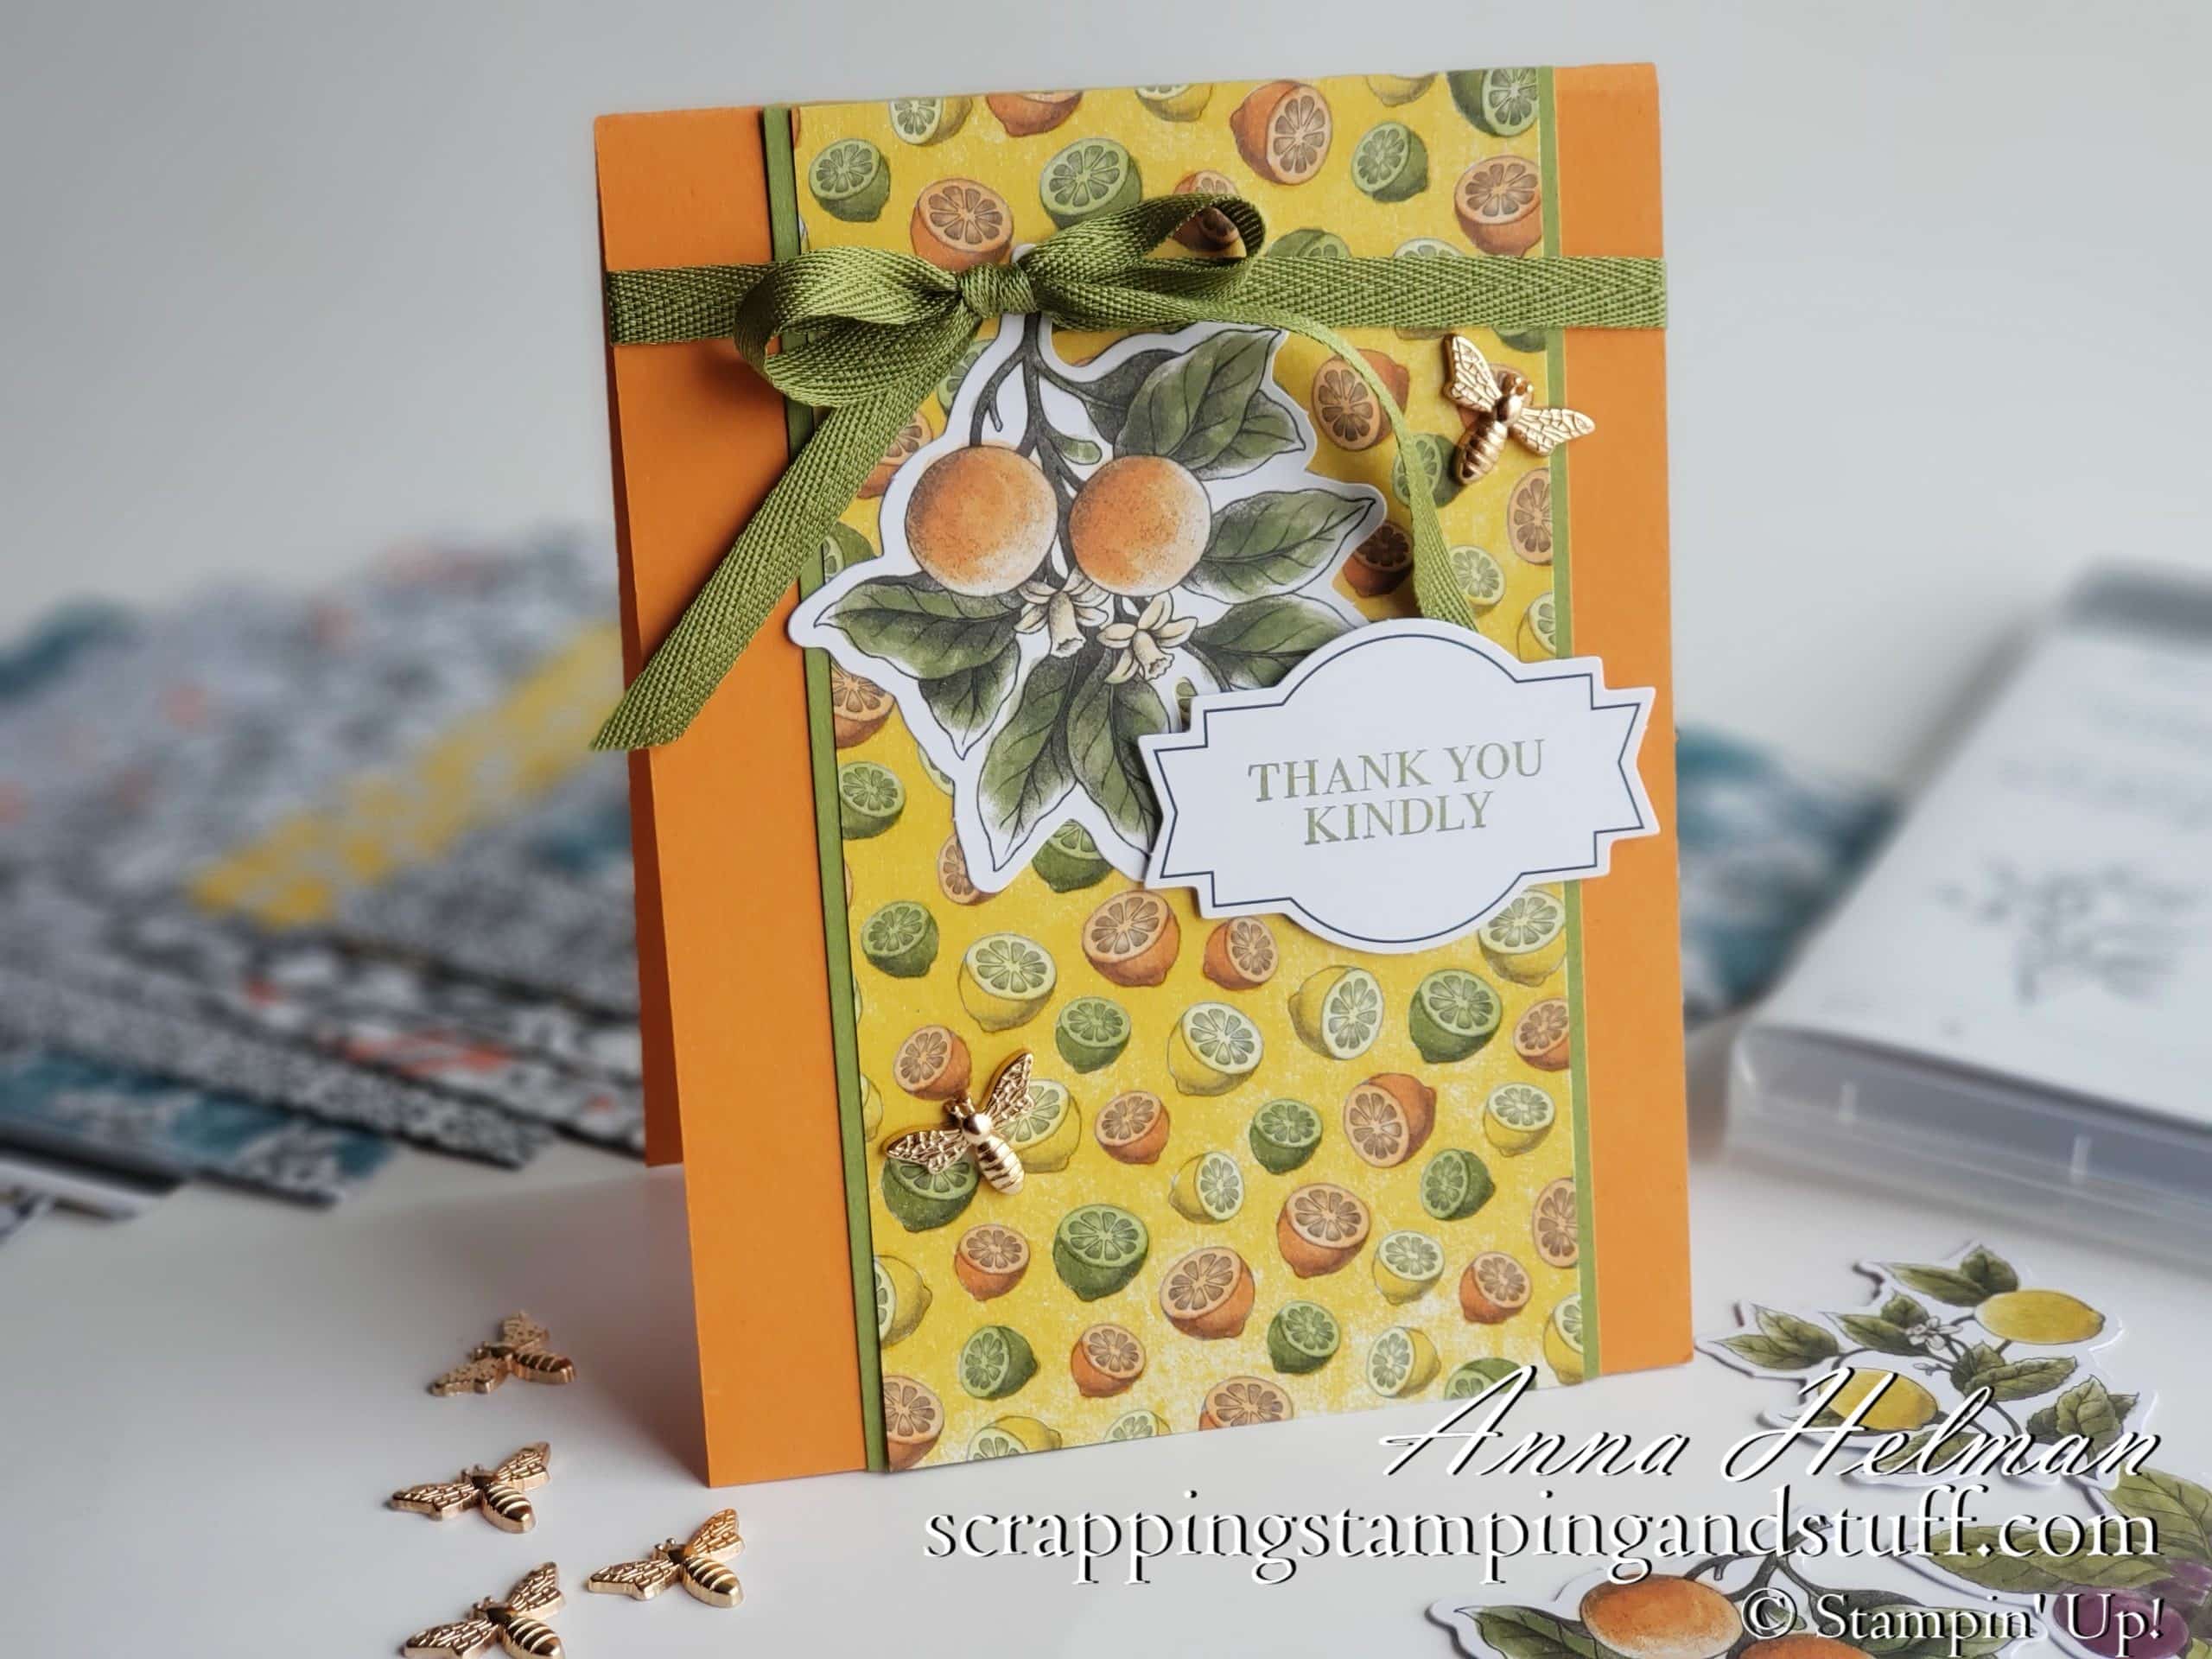 Stampin Up Botanical Prints Class Available!